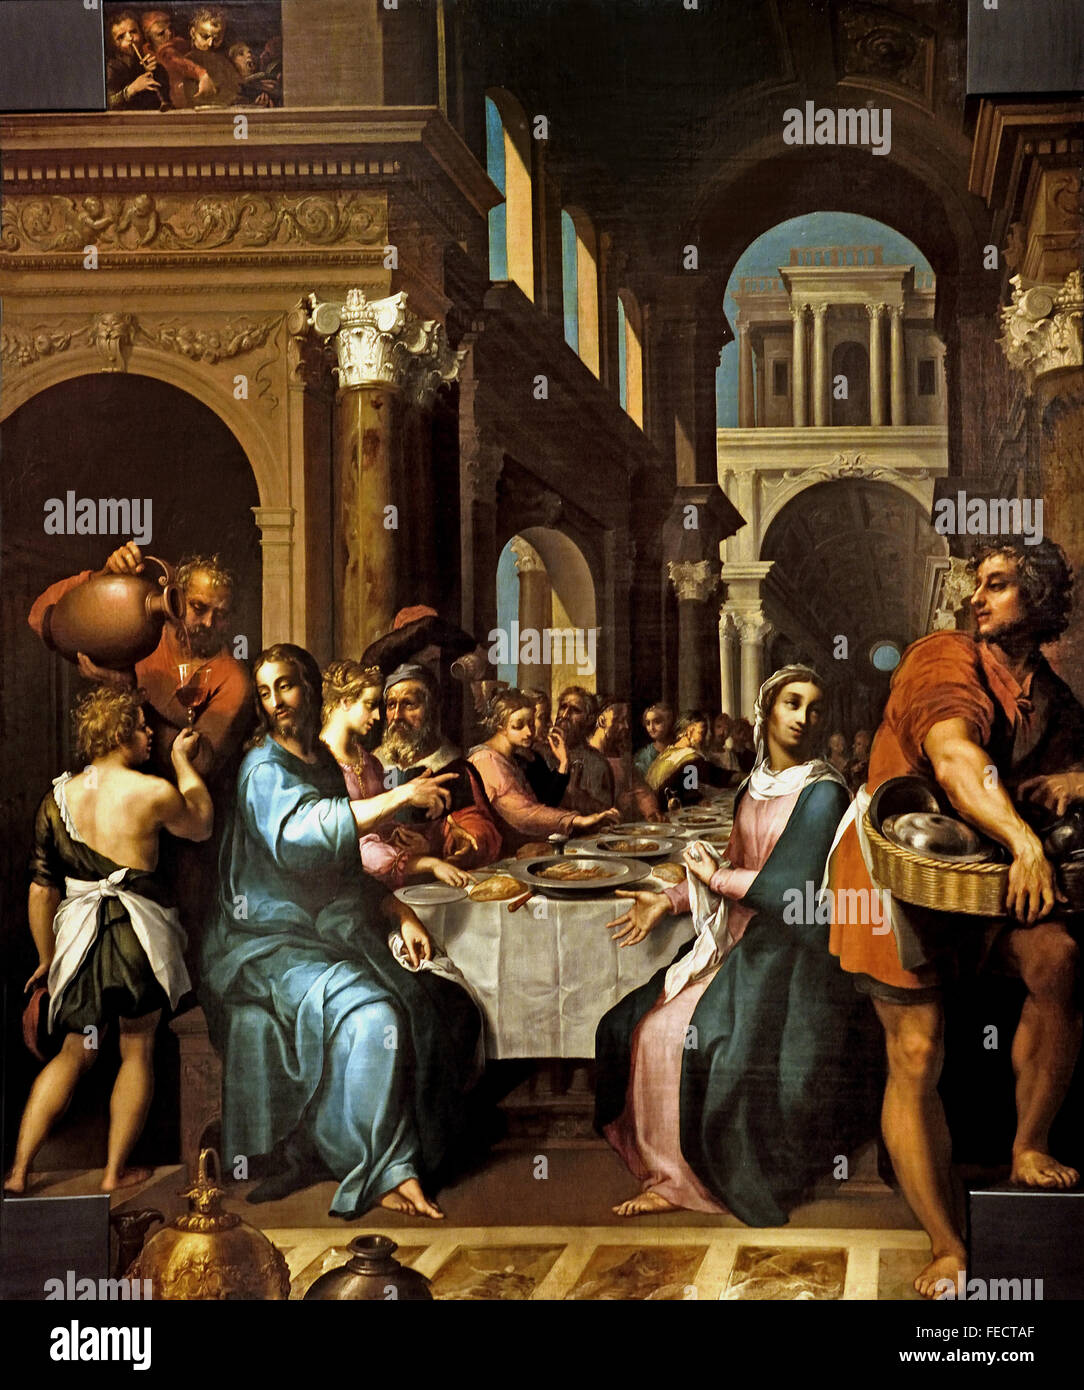 The Wedding at Cana 1618-1620 Quentin VARIN 1570 - 1634 France French   Jesus and his disciples were invited to a wedding celebration in Cana in the Galilee ) Stock Photo